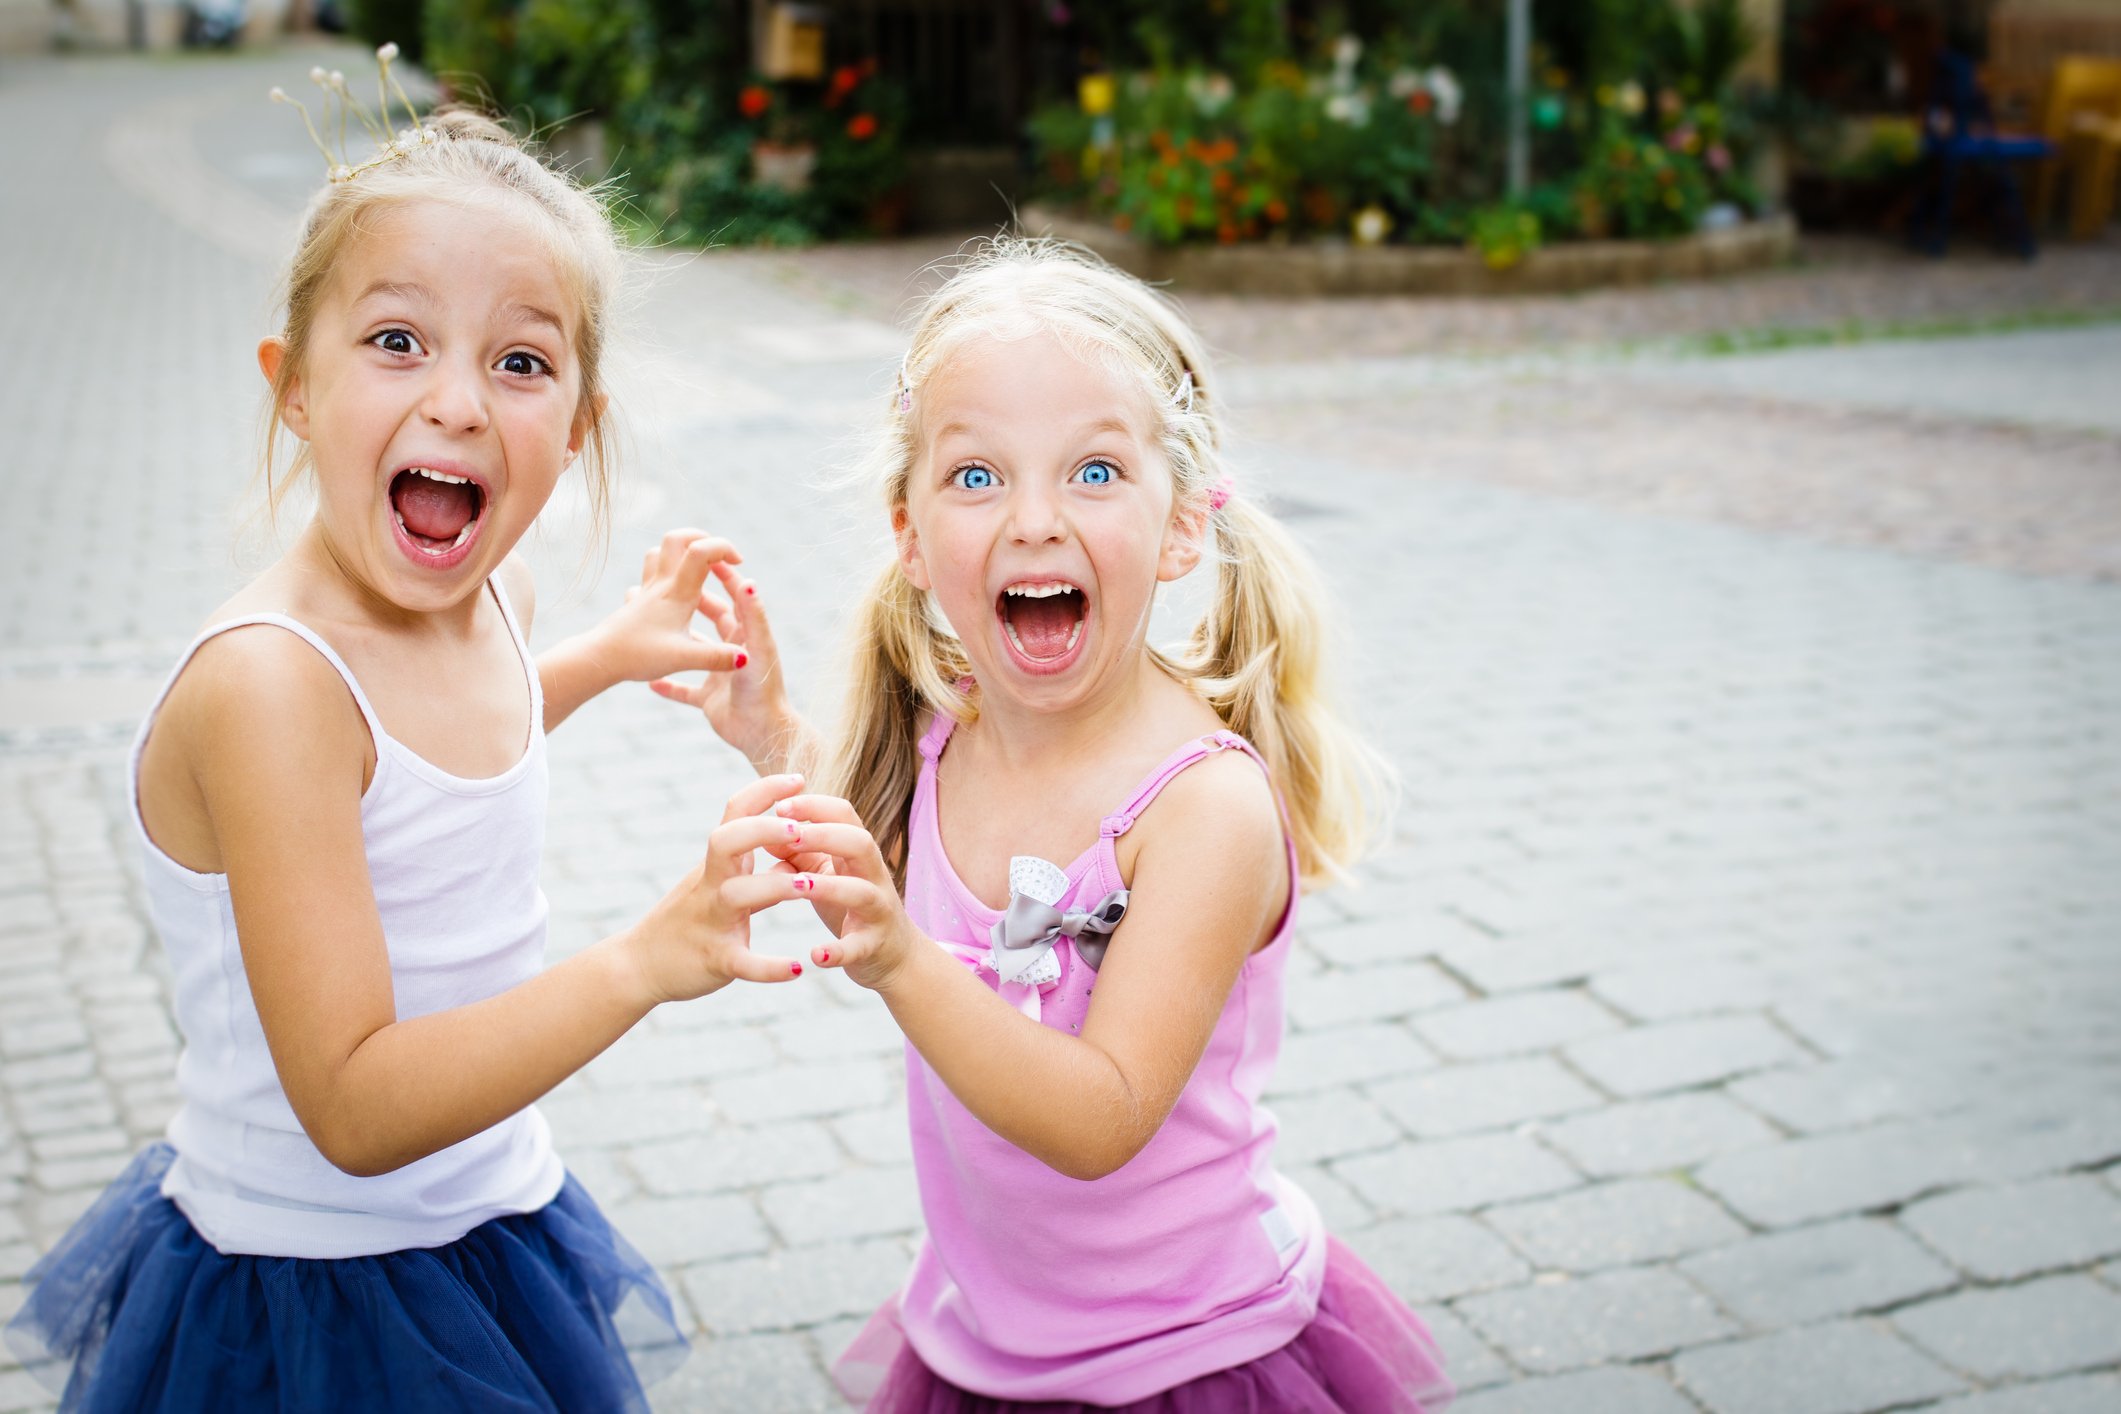 Photo of two girls having fun | Photo: Getty Images